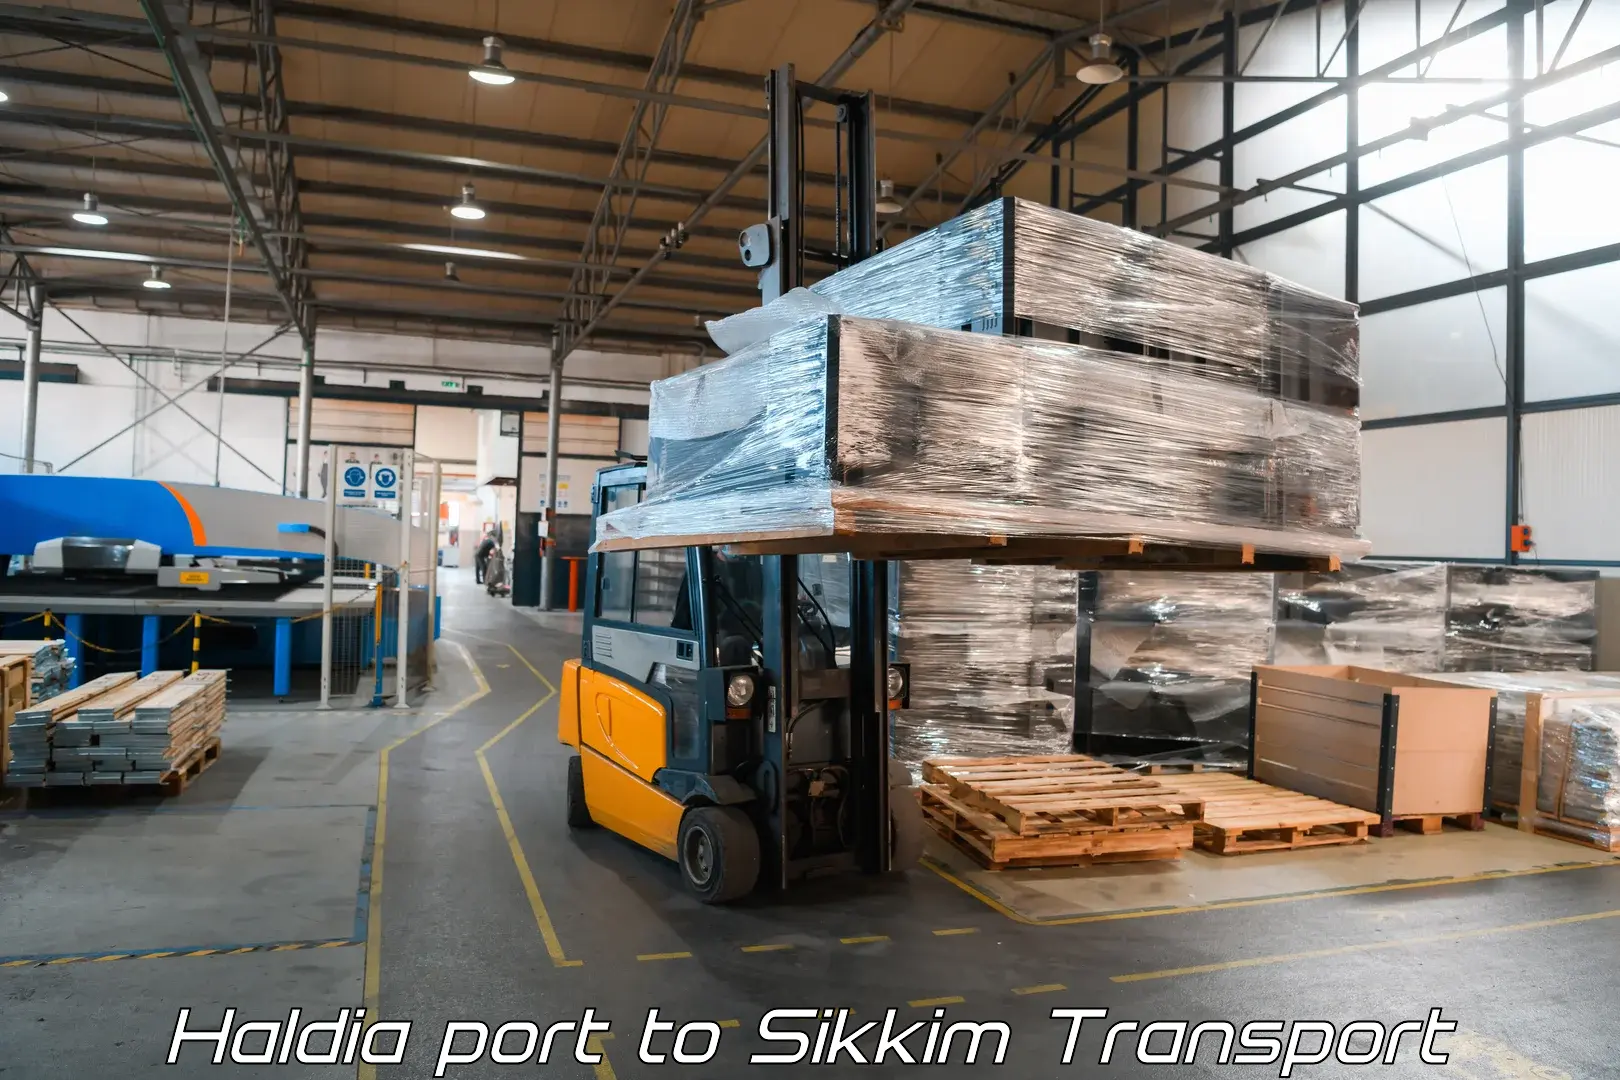 Transport bike from one state to another Haldia port to Sikkim